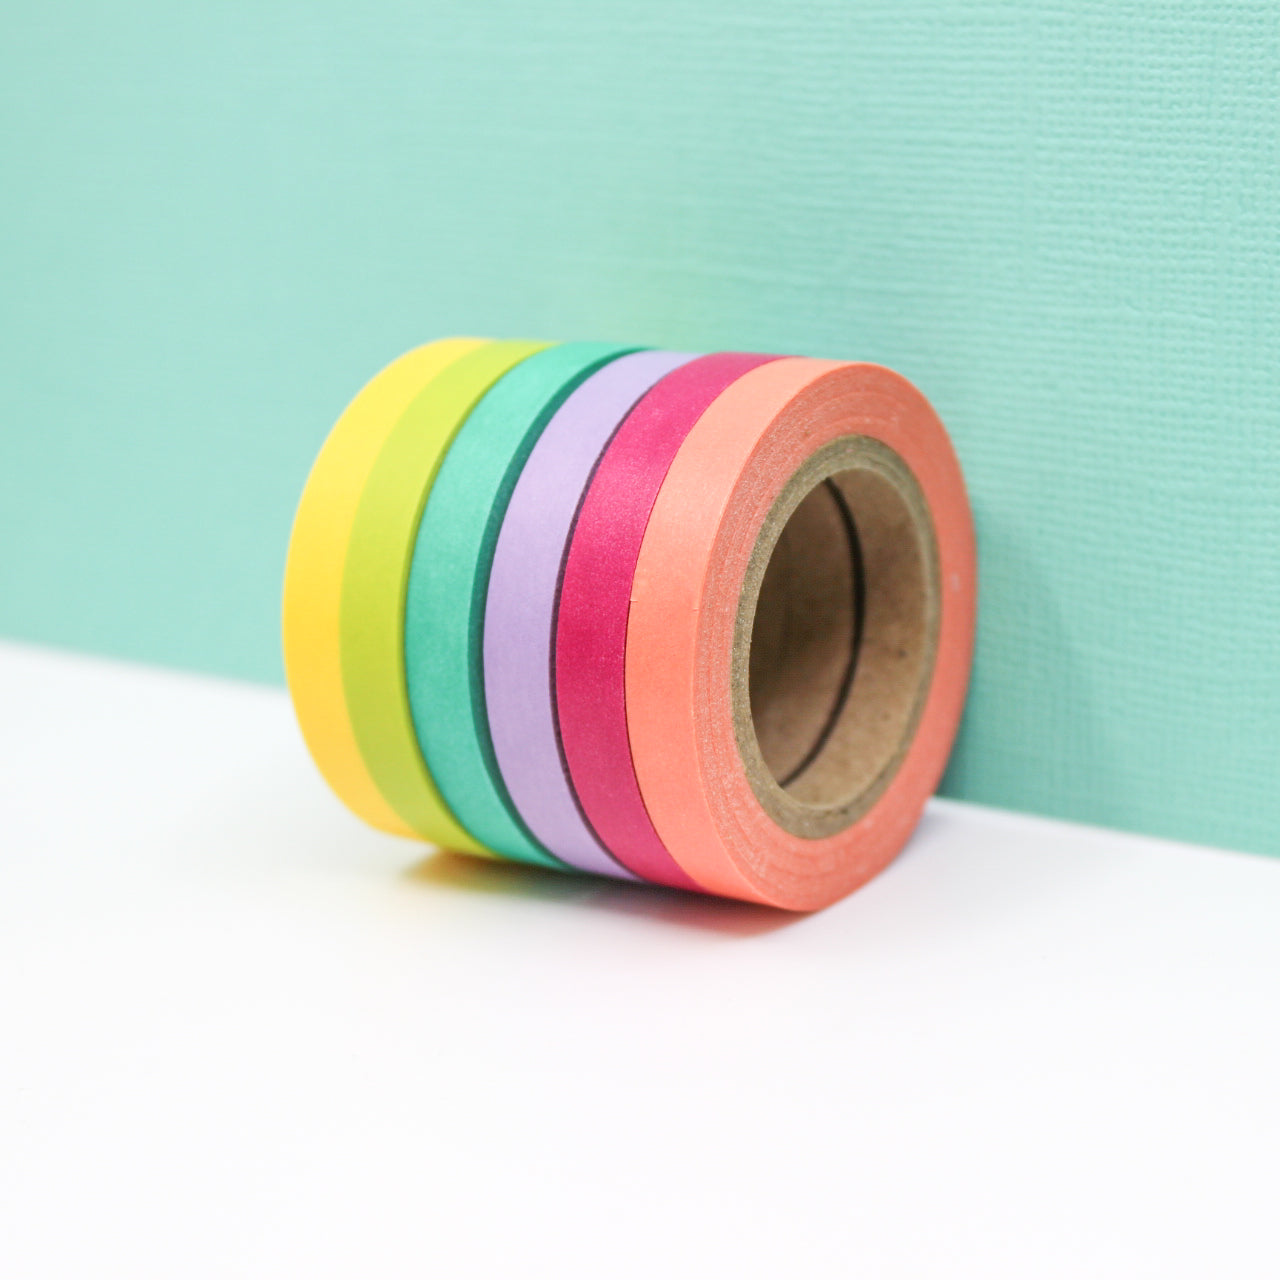 Add a touch of the tropics to your crafts with our Tropical Color Narrow Solid Washi Tape Set. This set includes an array of vibrant and narrow solid color washi tapes, perfect for adding a burst of color and creativity to your projects. This tape is sold at BBB Supplies Craft Shop.